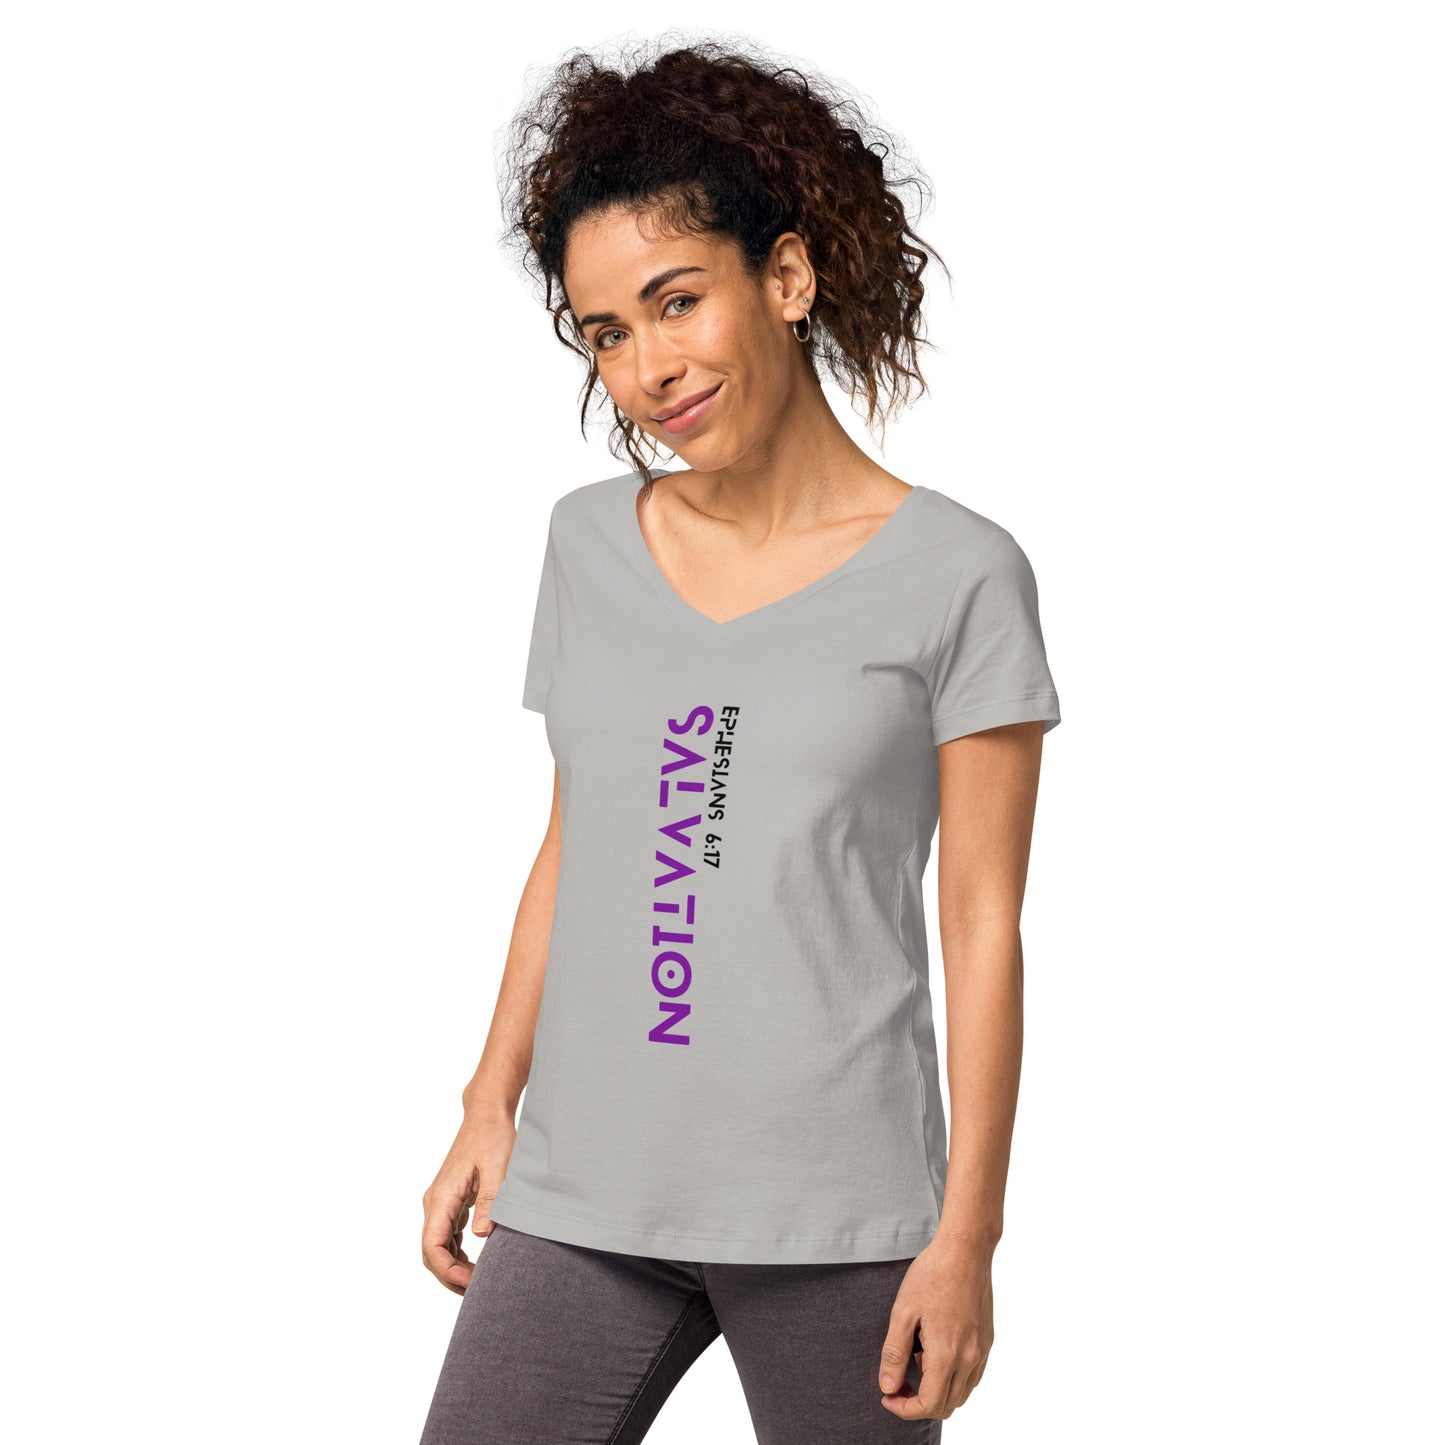 Salvation Women’s fitted v-neck t-shirt